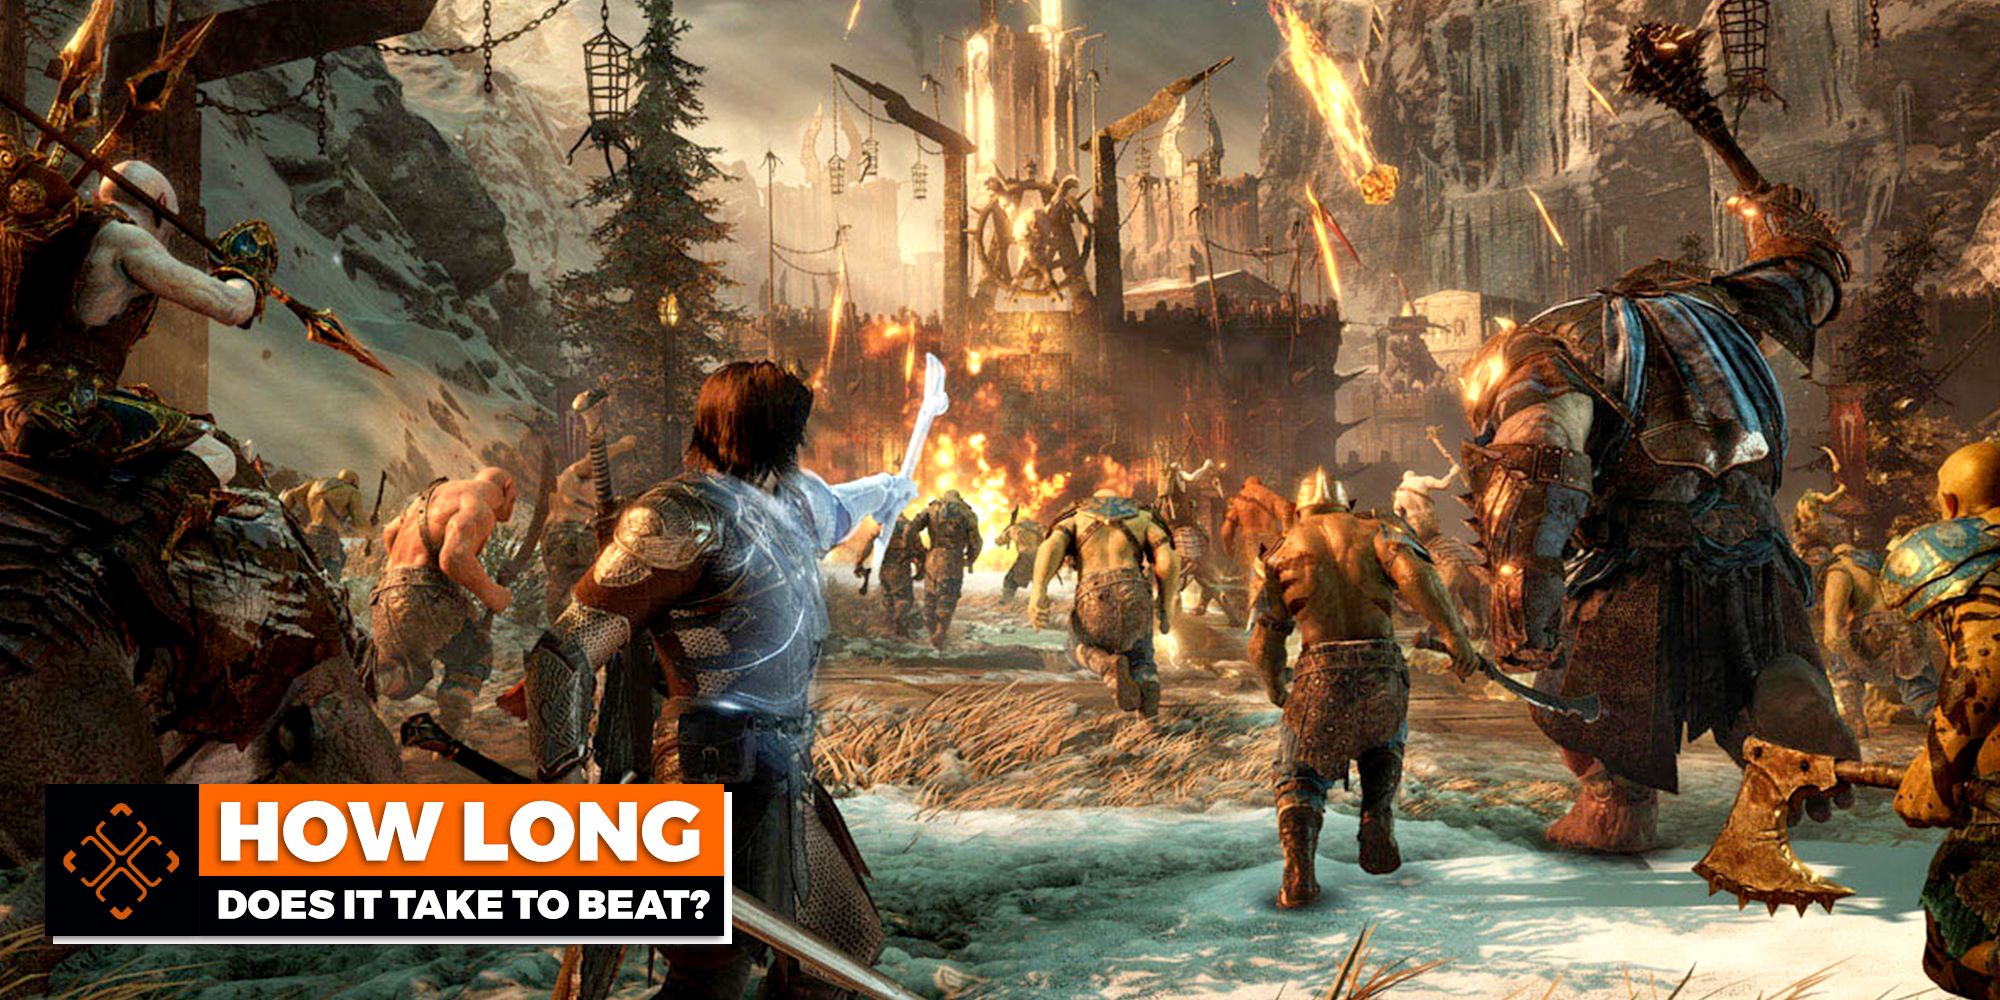 Shadow of Mordor: To be or not to be… Canon? – Middle-earth News